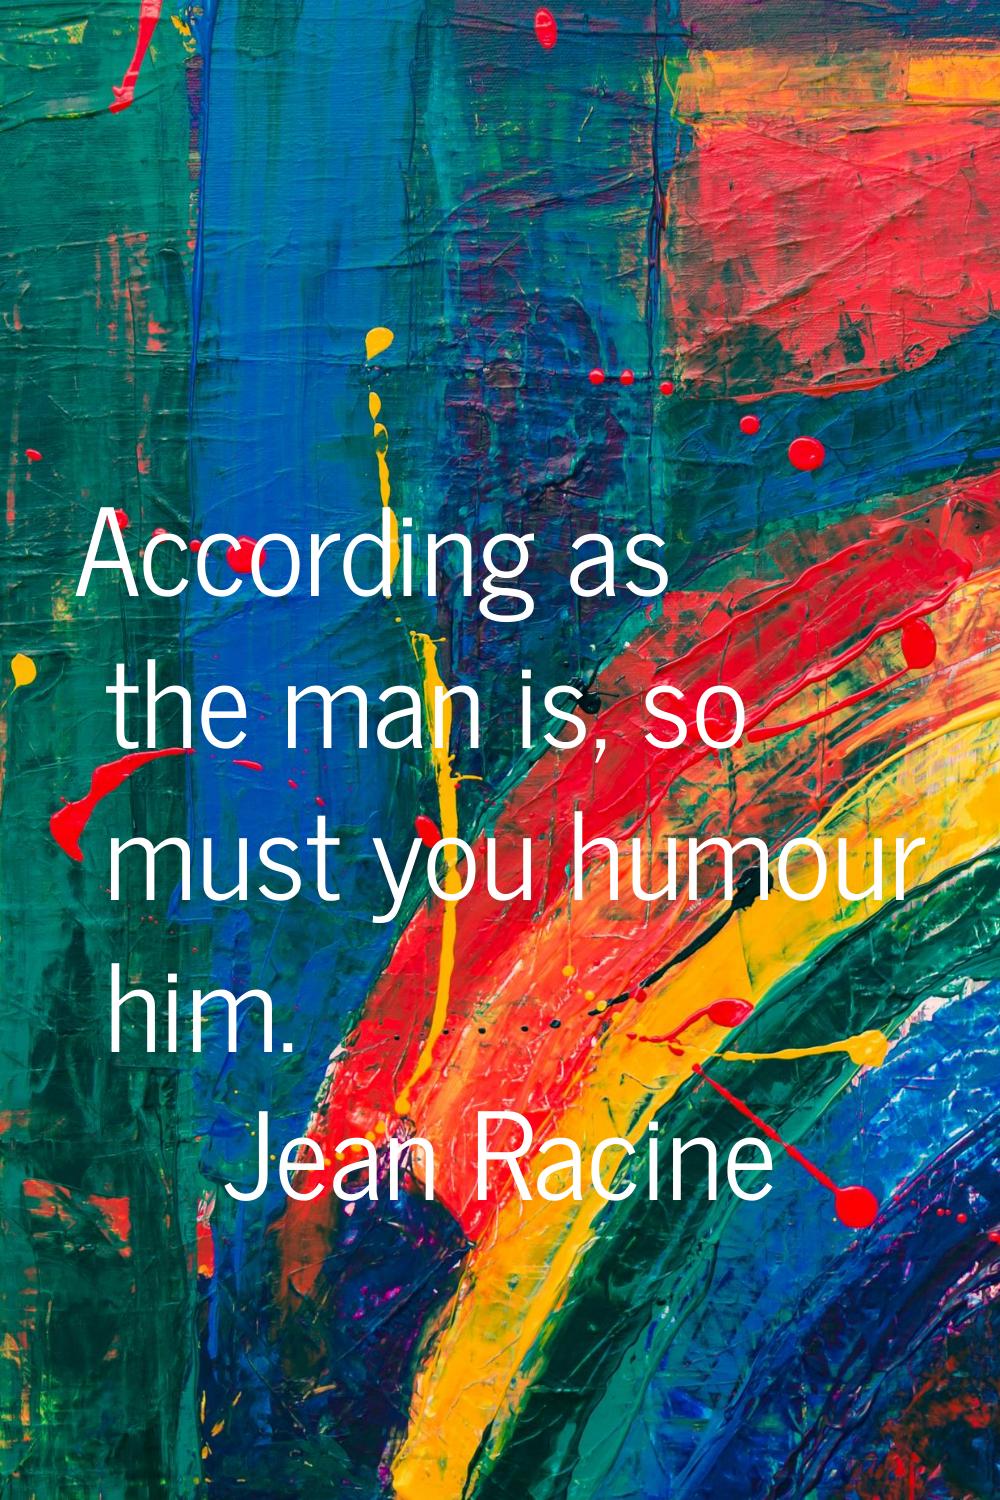 According as the man is, so must you humour him.